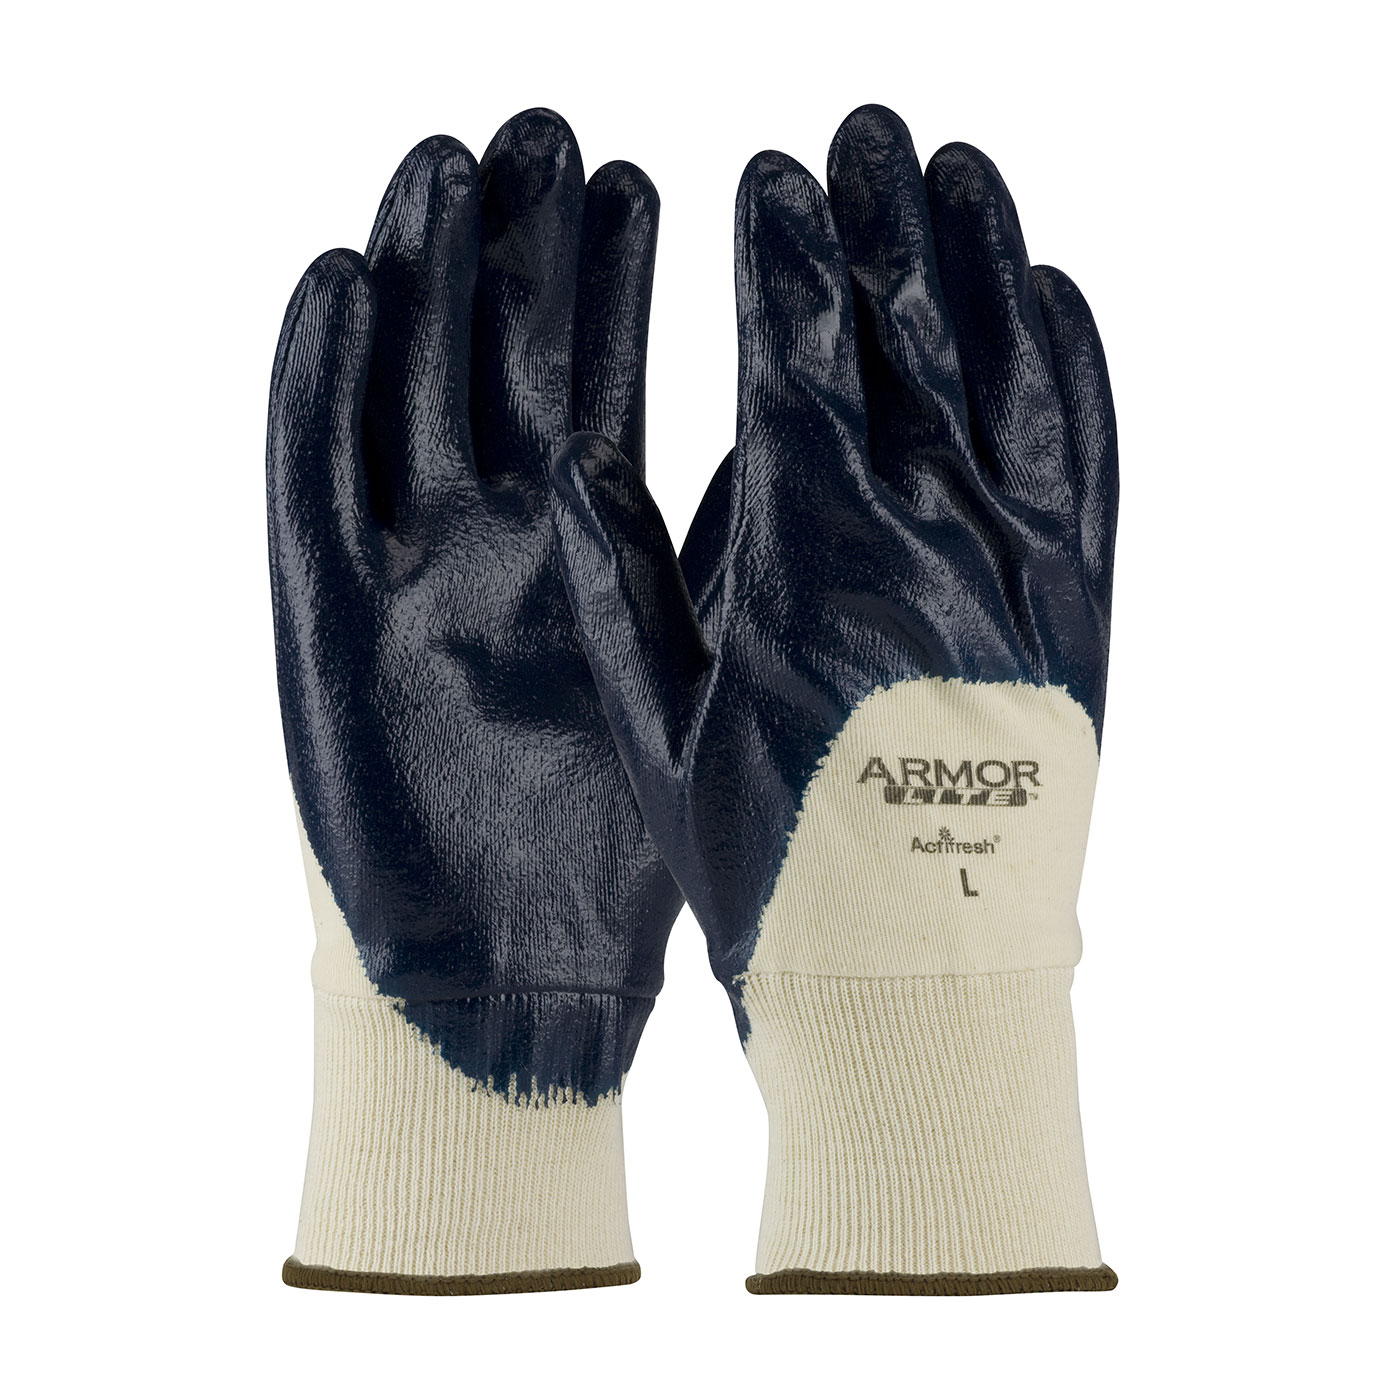 56-3170 PIP® ArmorLite® Nitrile Dipped Glove with Interlock Liner and Textured Finish on Palm, Fingers & Knuckles - Knitwrist